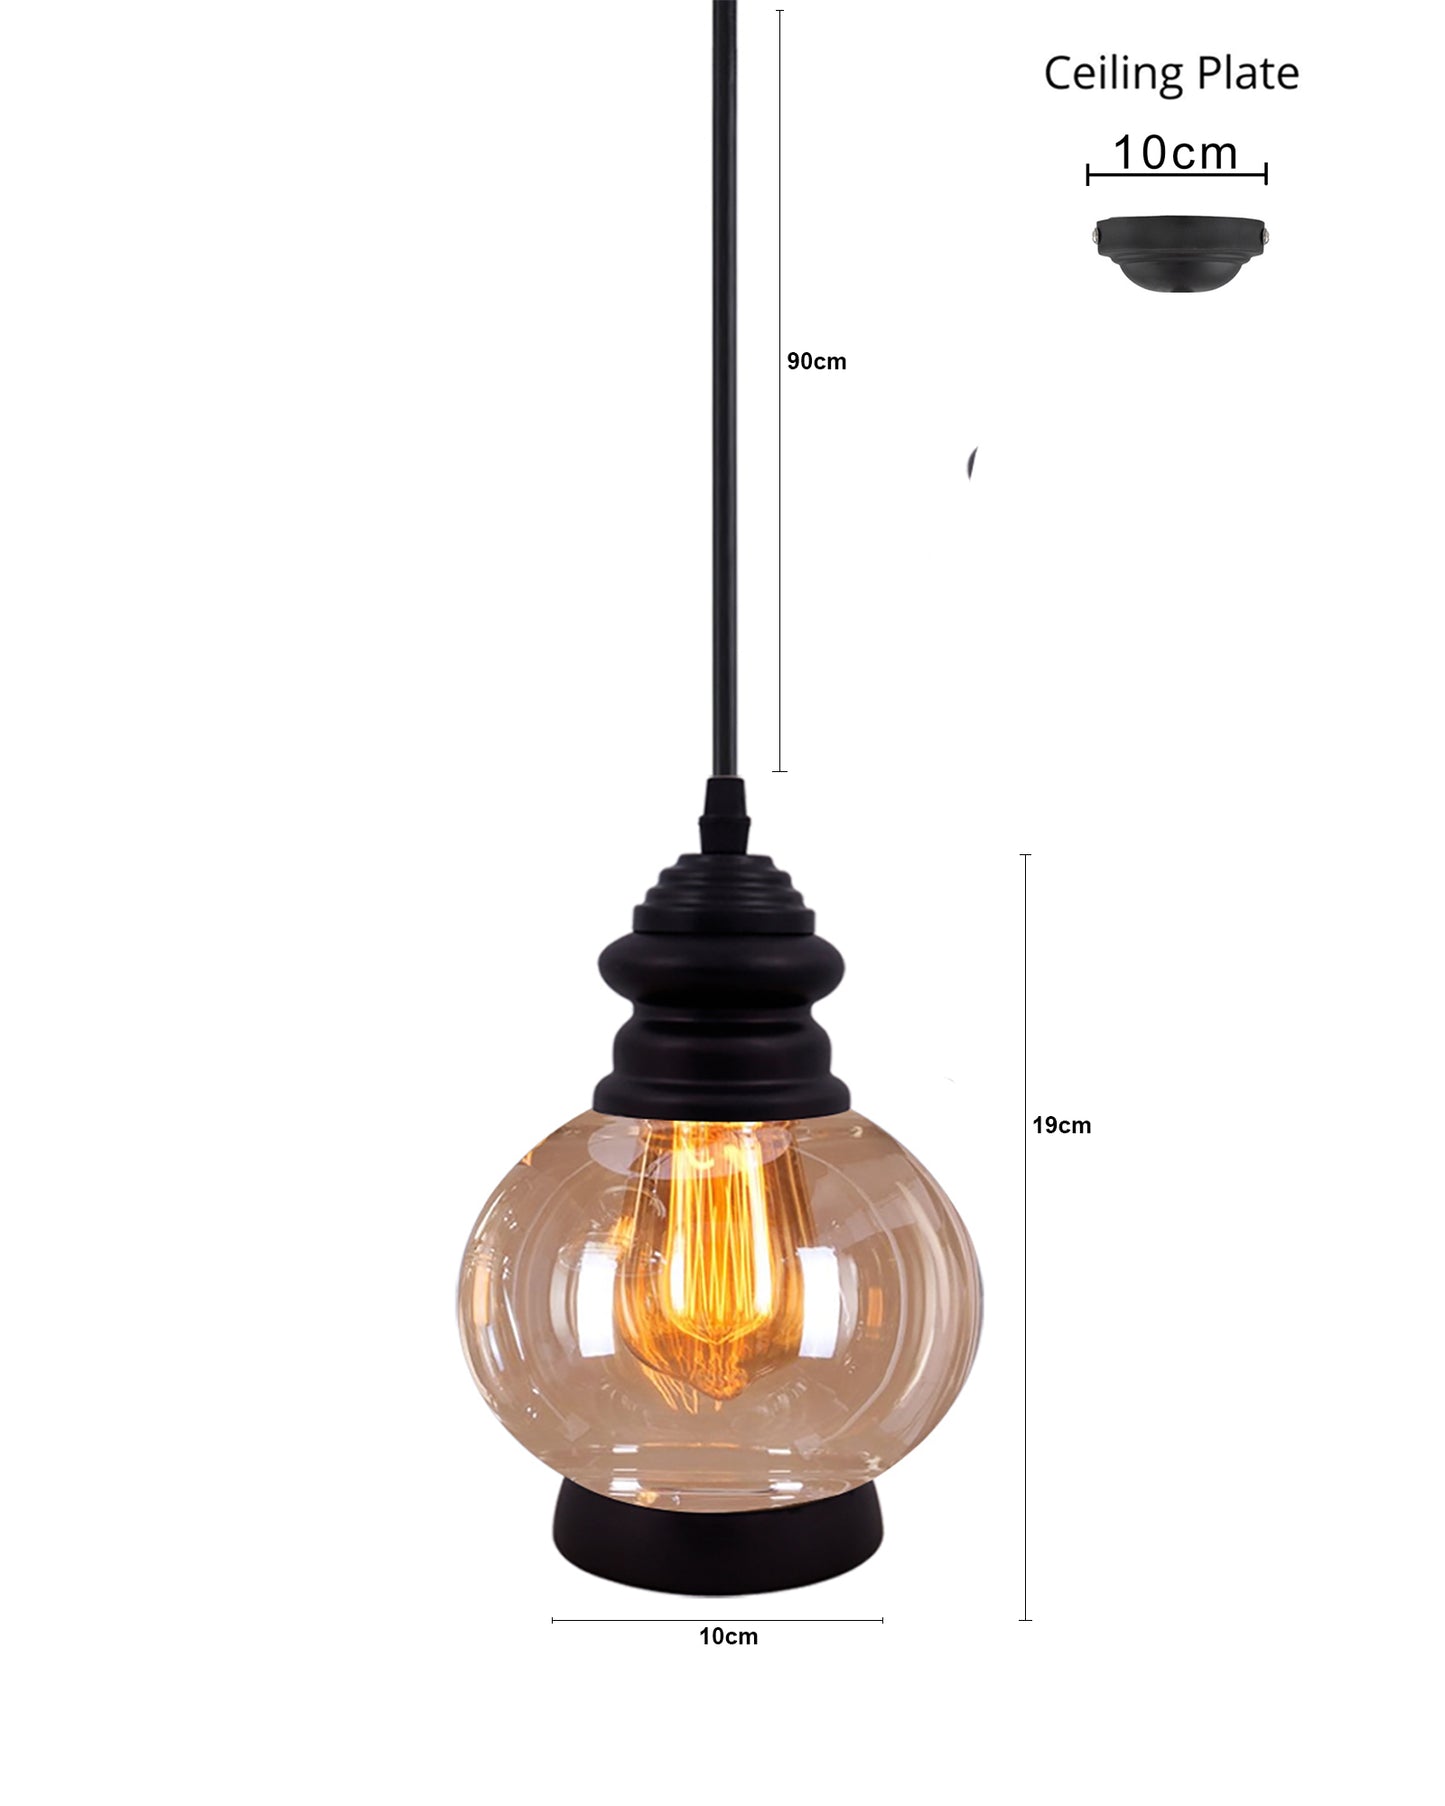 Pendant Light with Amber Glass Jar Shade Matte Adjustable Hanging Lighting Fixture, Industrial Antique Pendant Lamp for Kitchen Island, Dining Room, Foyer, Farmhouse